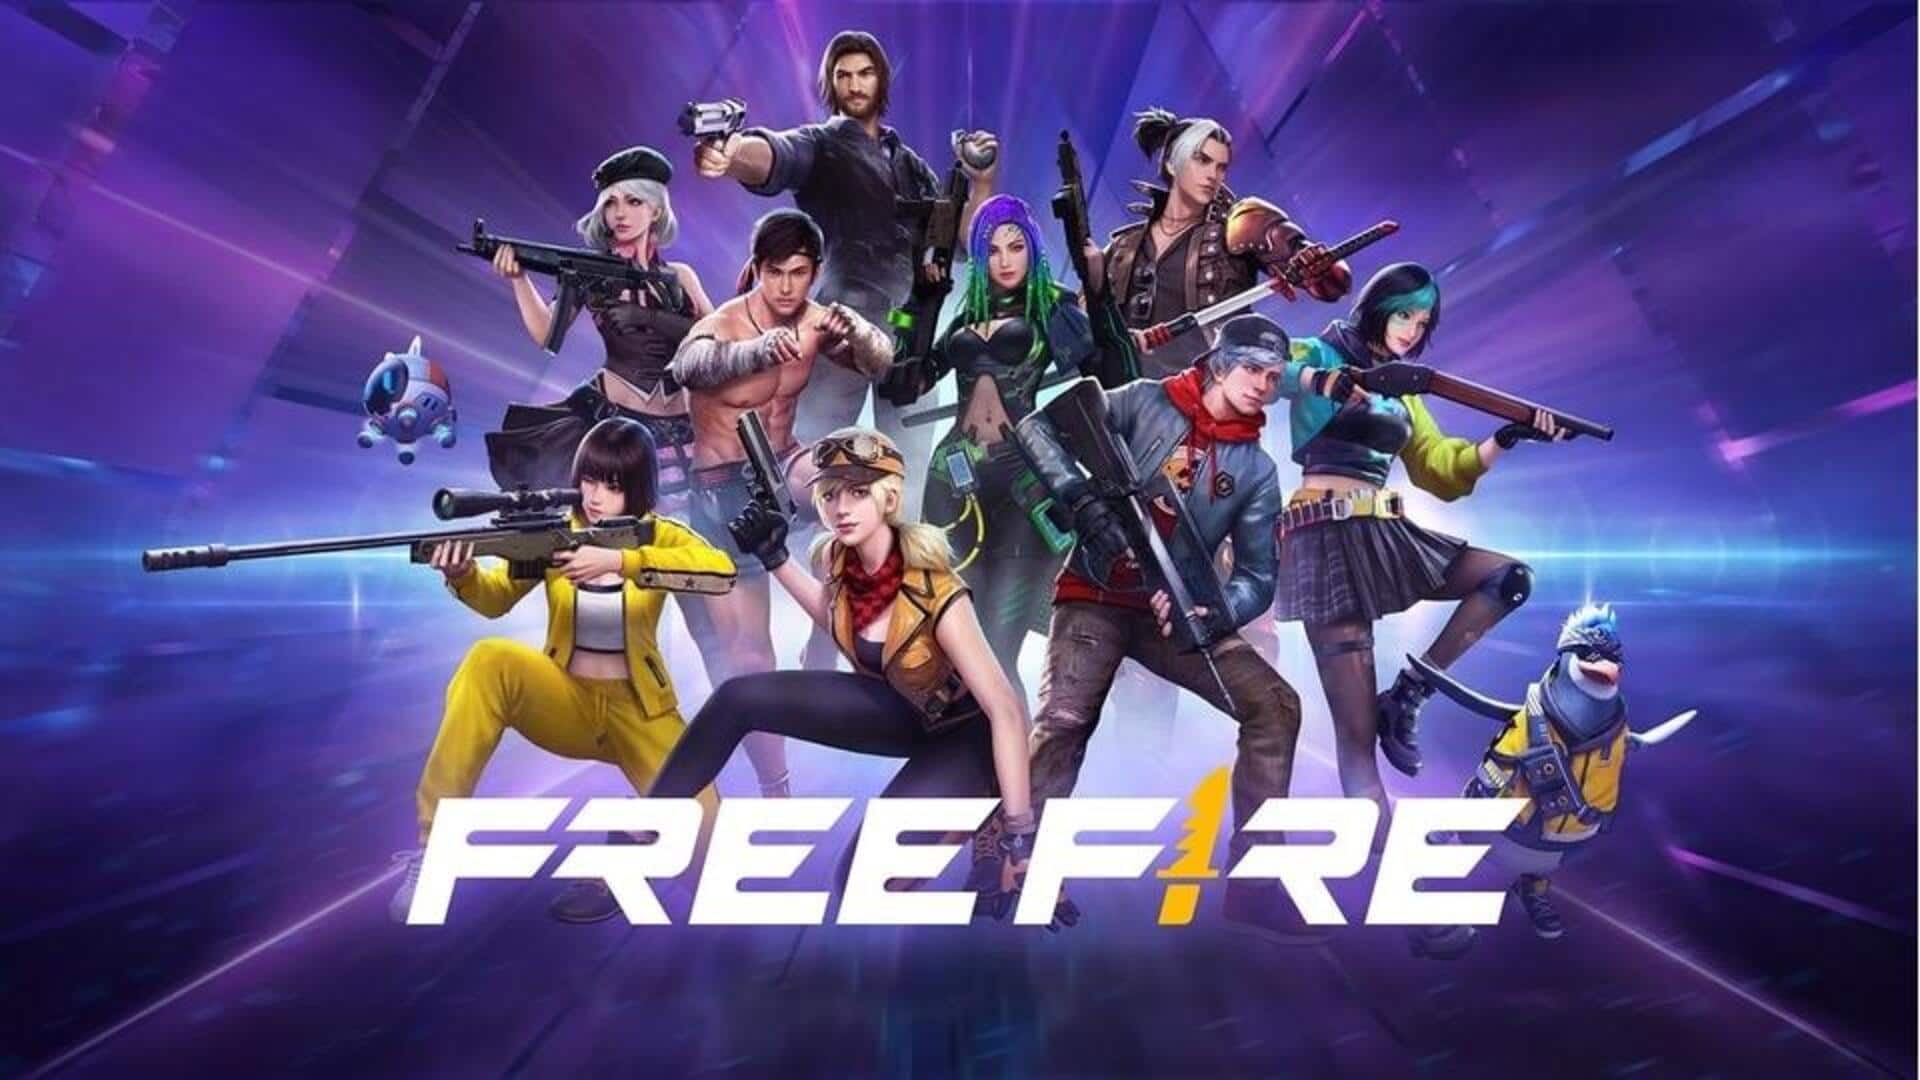 Garena Free Fire returns to India with Dhoni as ambassador